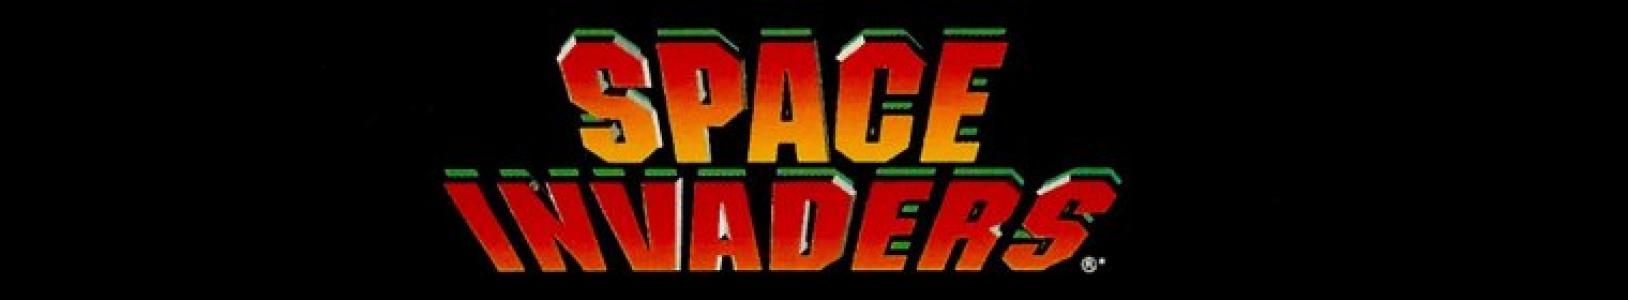 Space Invaders banner